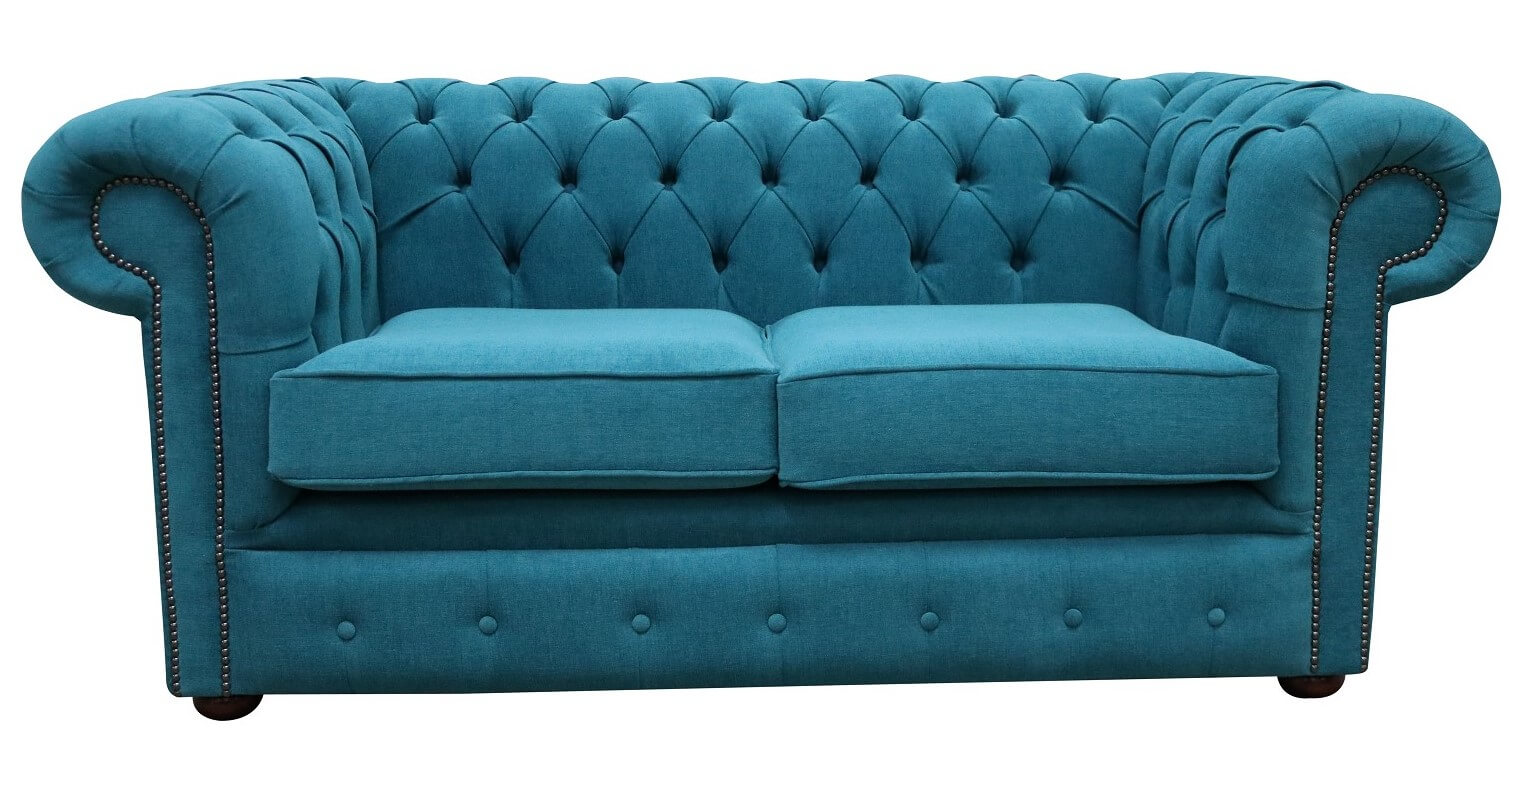 Sitting in Style The Comfort Quotient of Chesterfield Sofas  %Post Title